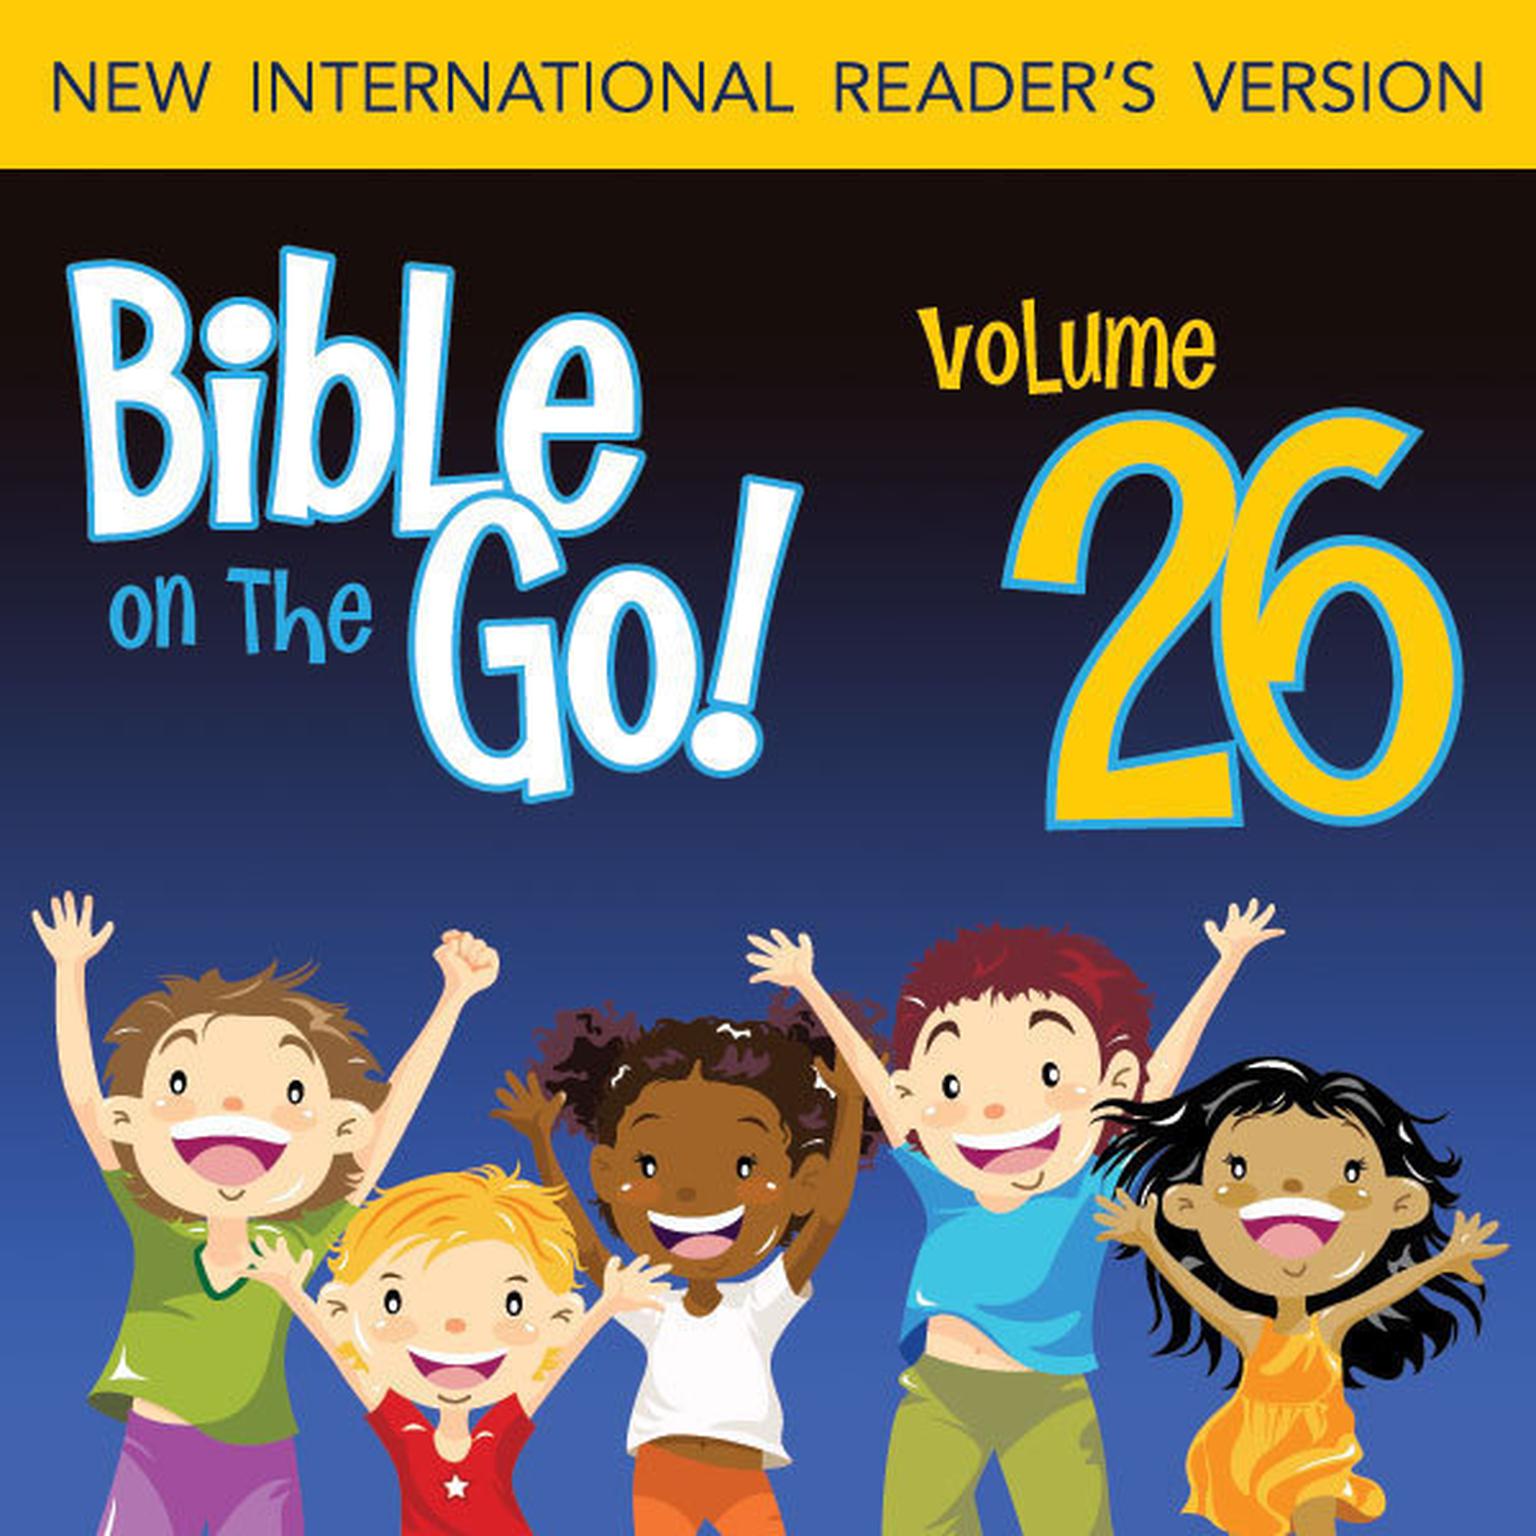 Bible on the Go Audio Bible - New International Readers Version, NIrV: Vol. 26 Psalm 47, 81, 92, 96, 100, 113, 136, 150, 8, 19, 93: Psalm 47, 81, 92, 96, 100, 113, 136, 150, 8, 19, 93 Audiobook, by Zondervan